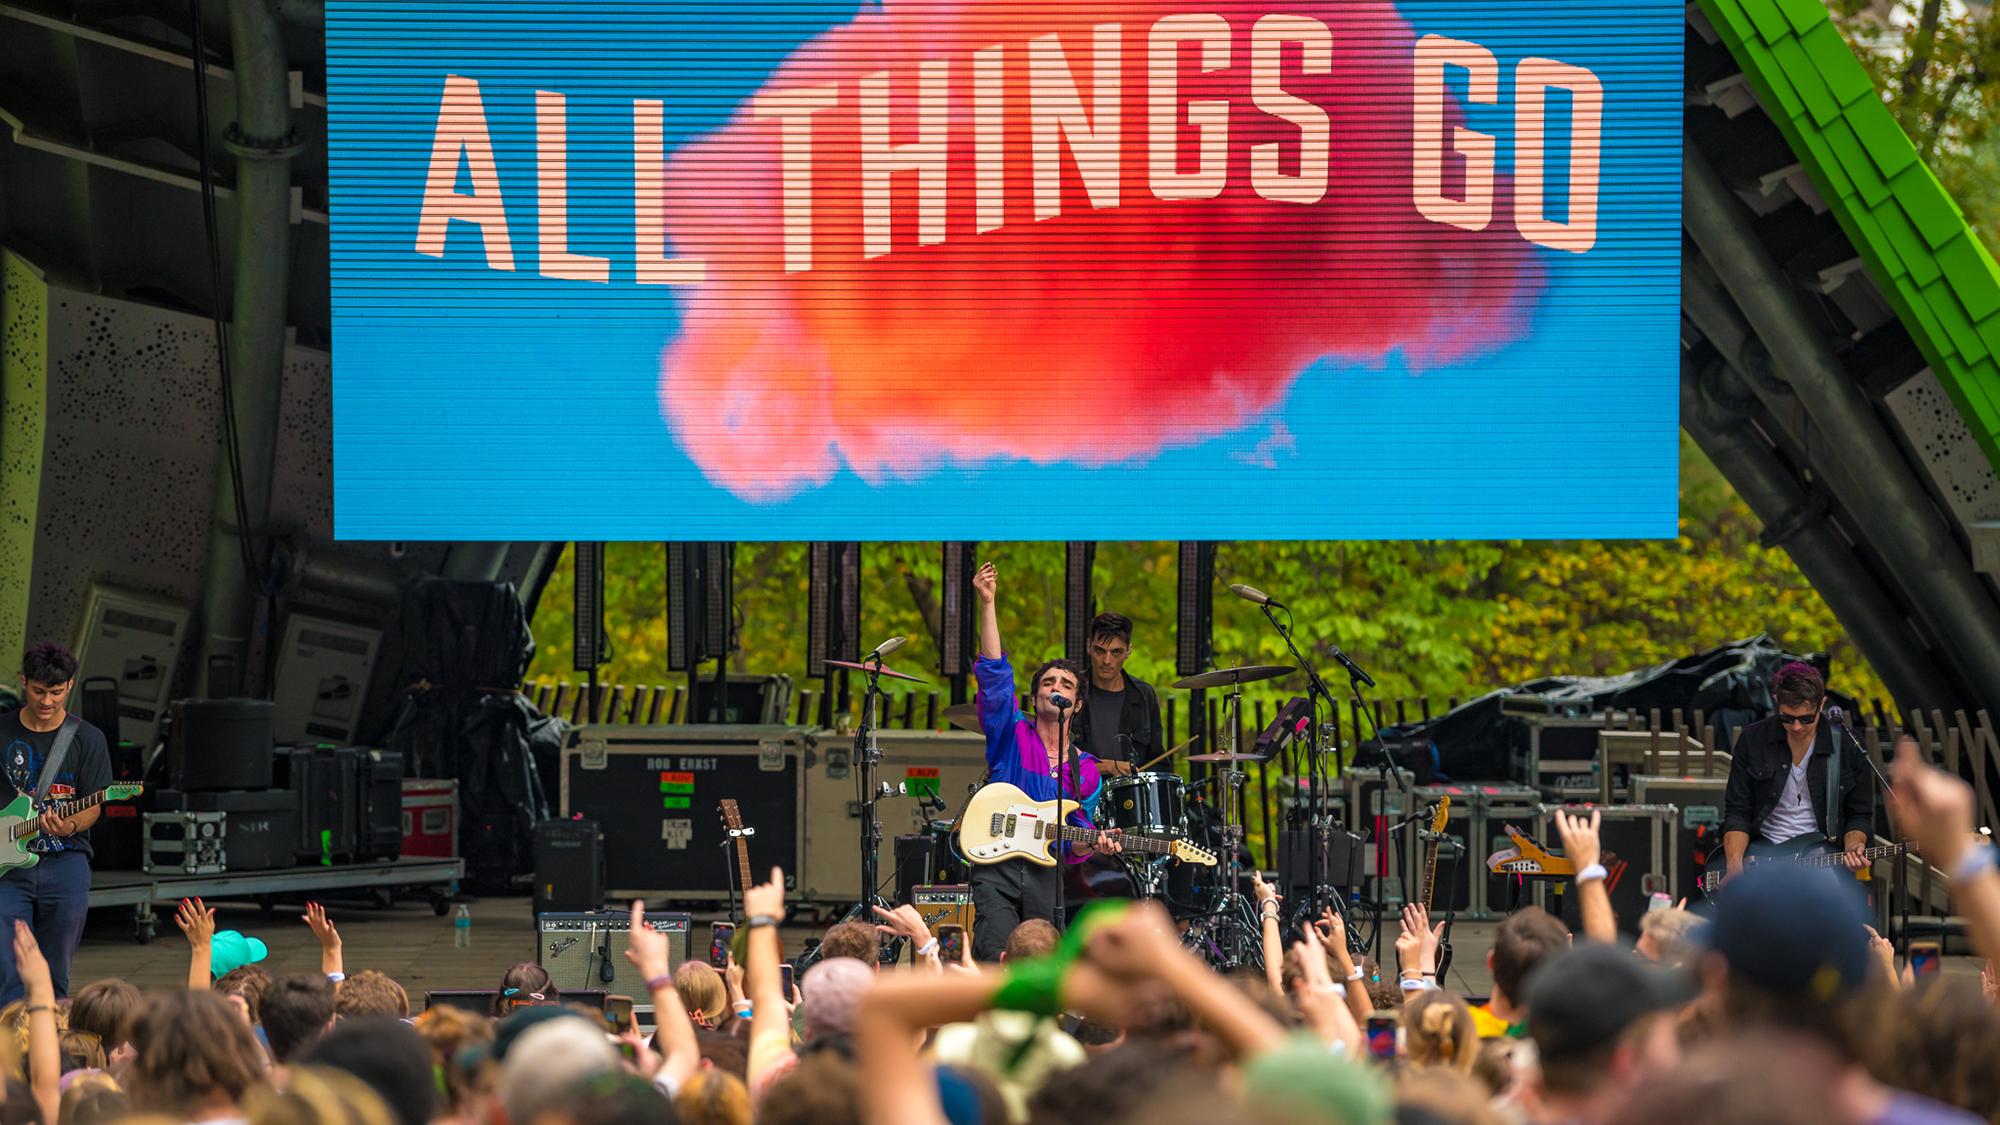 Rain didn’t stop the ethereal magic of the All Things Go Music Festival